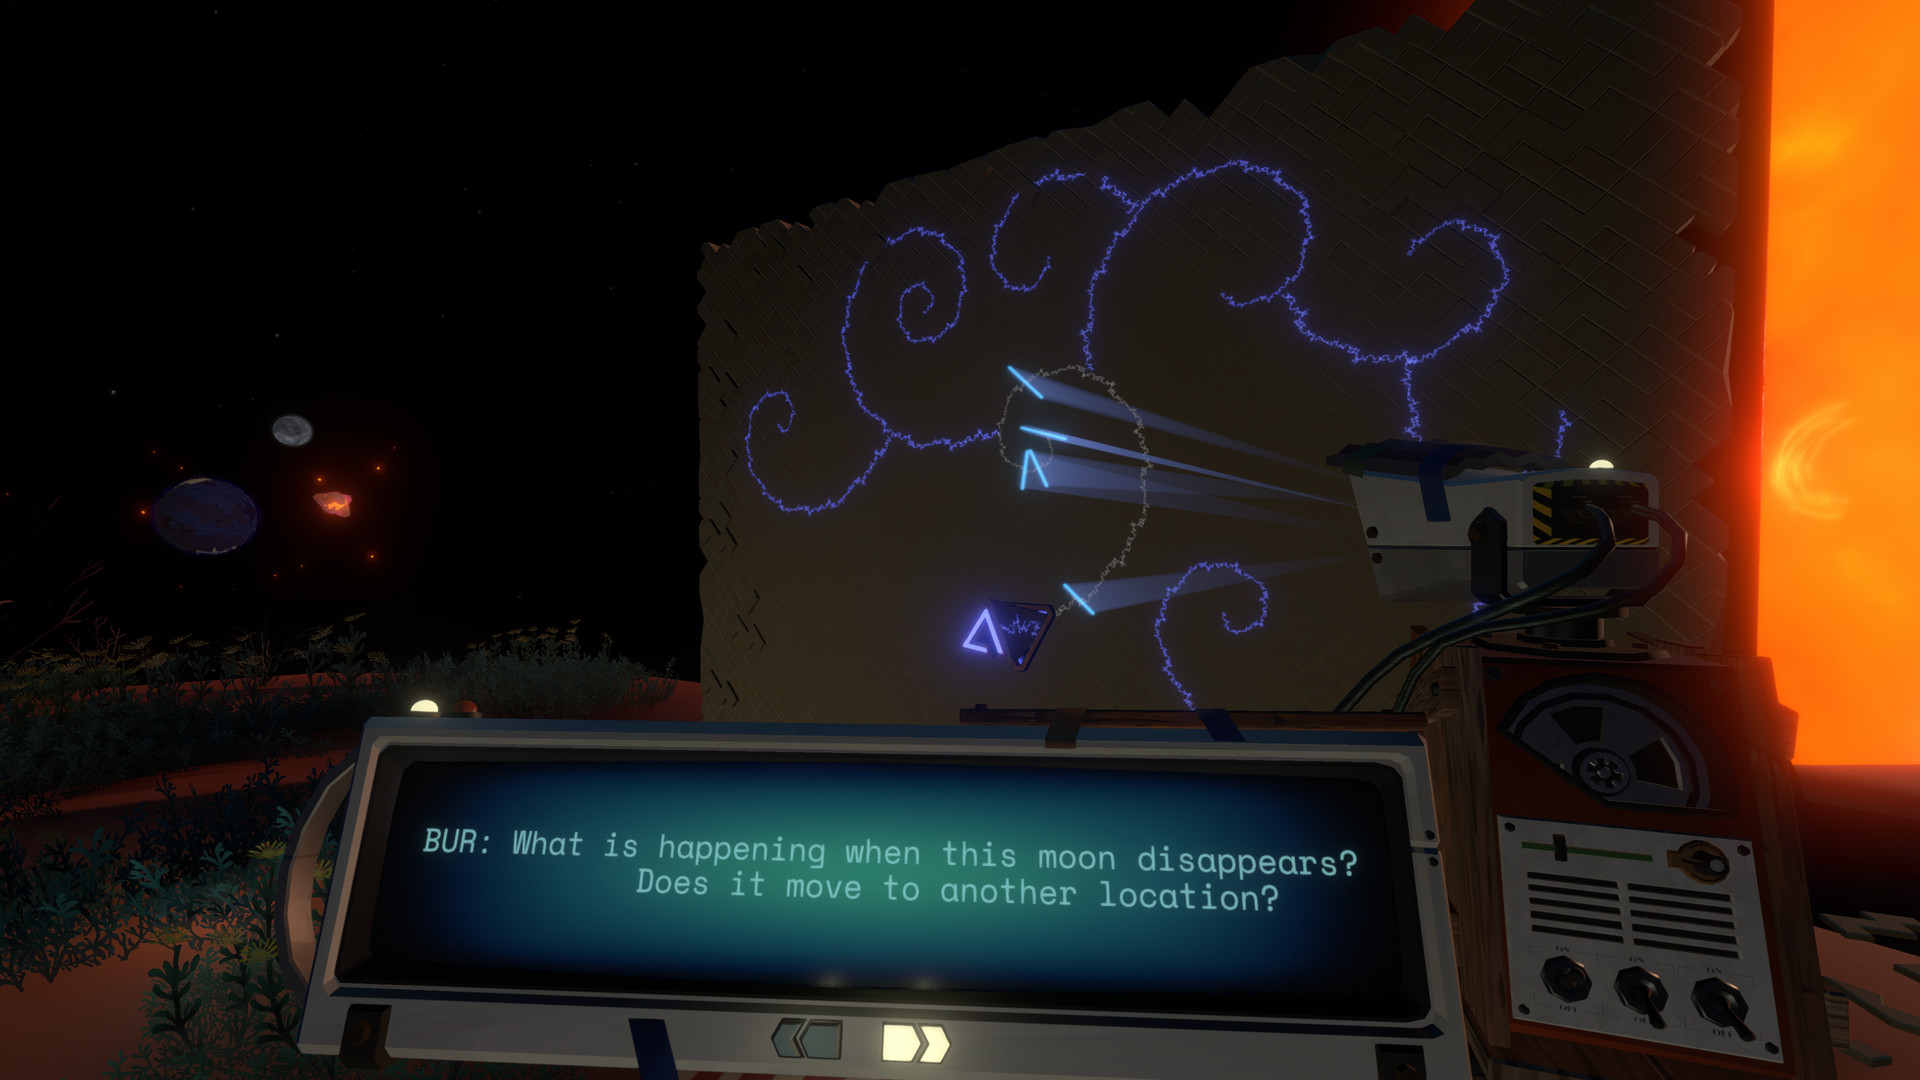 Outer Wilds | MA-Asia (fb231367-9c43-42eb-b2a1-295bfbfb20b3)